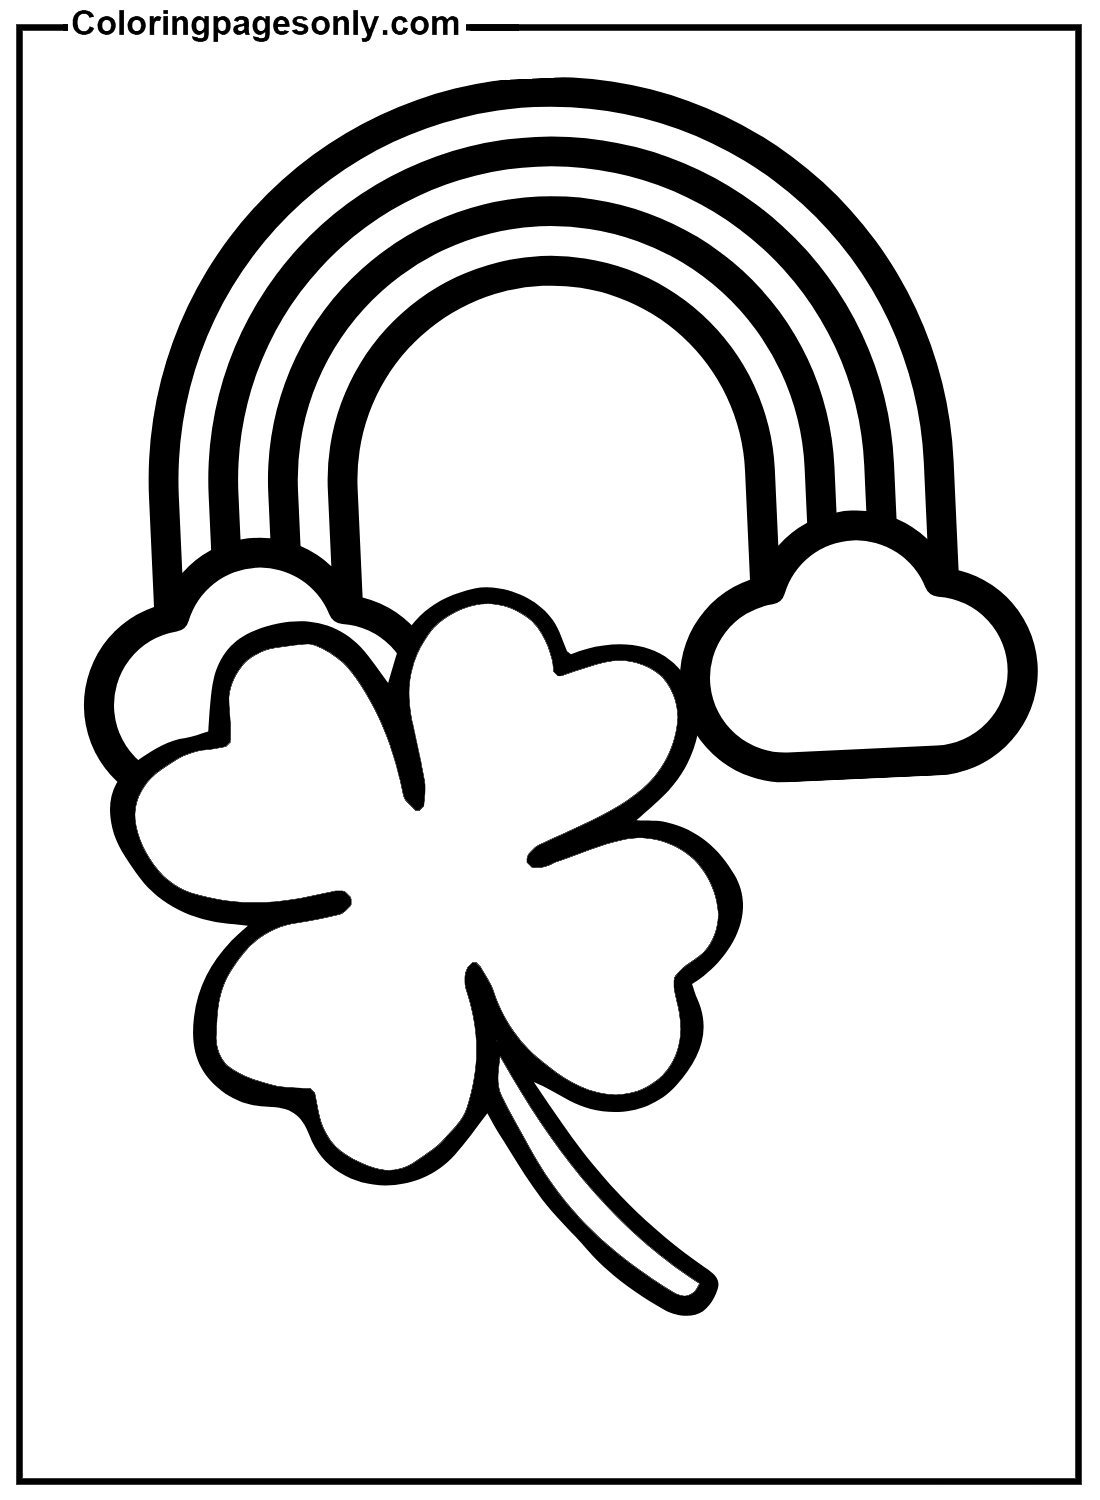 Shamrock With Rainbow Coloring Pages